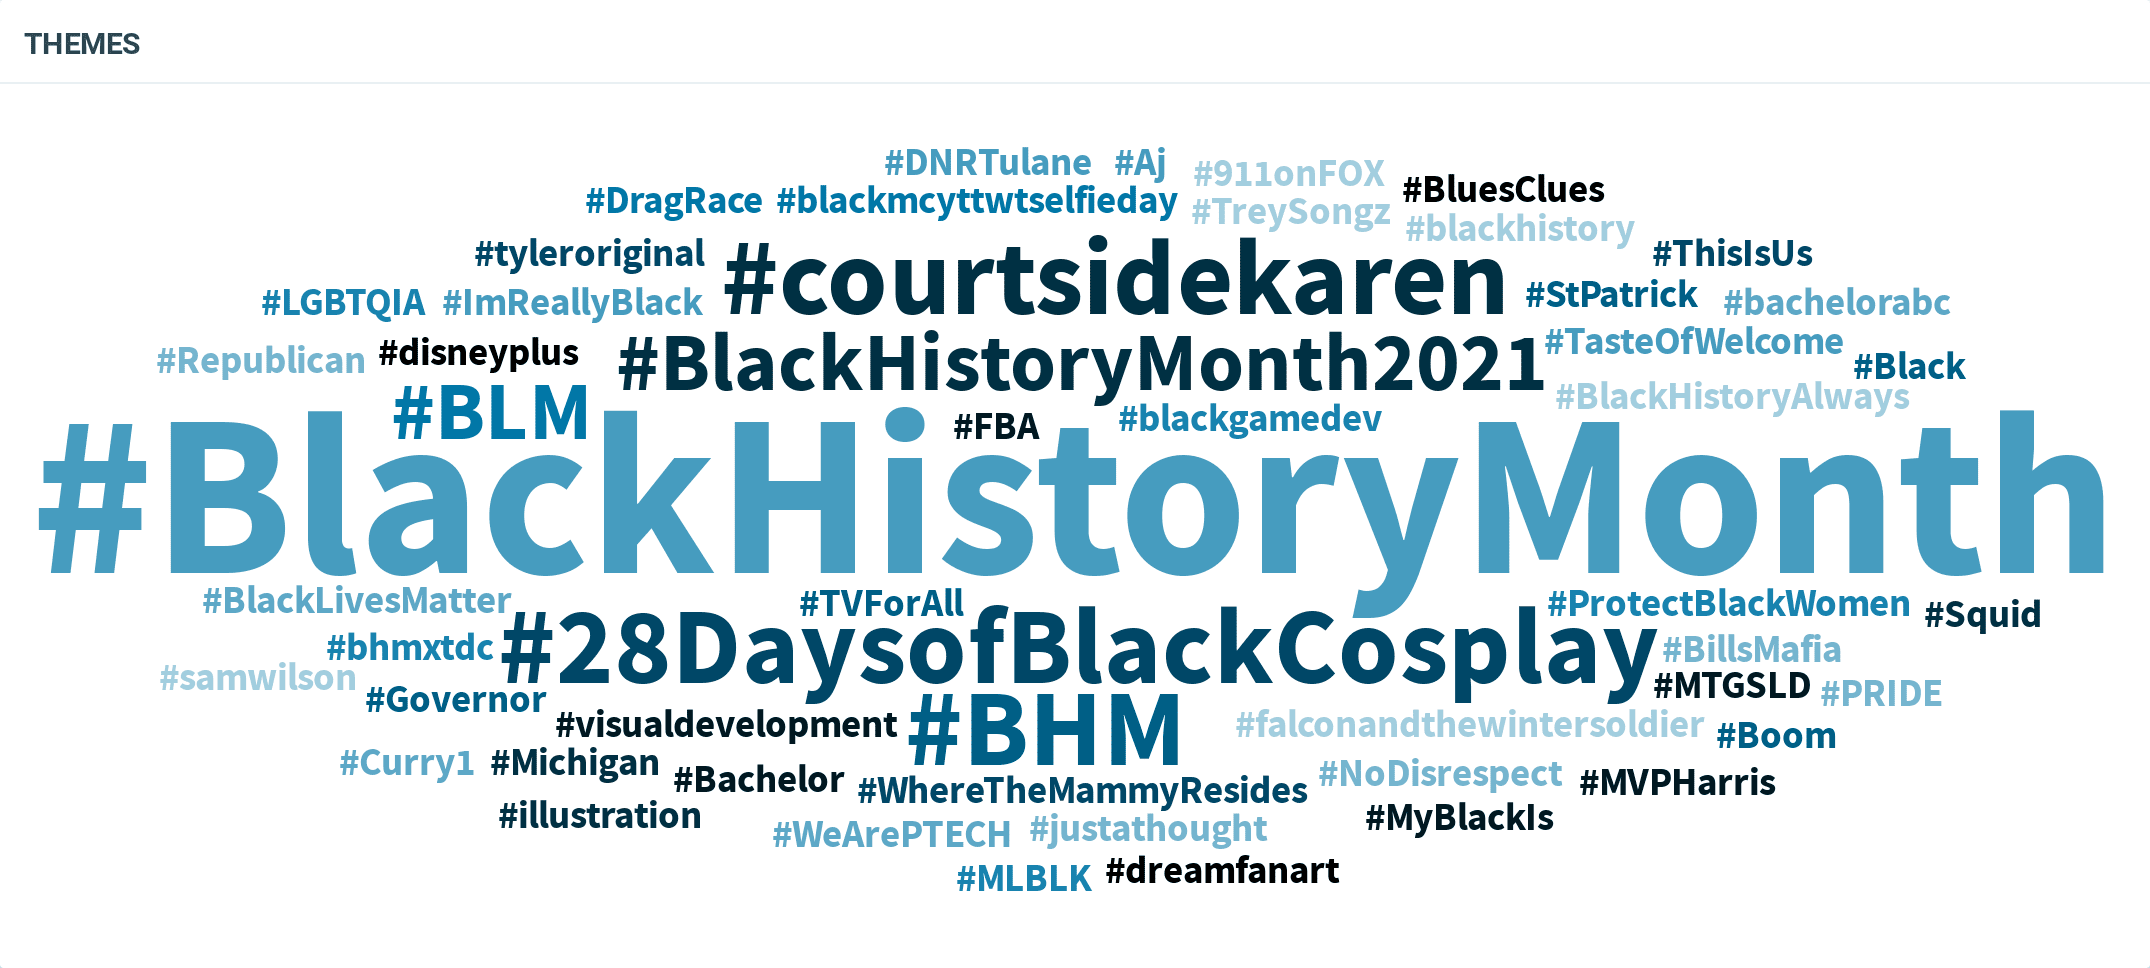 Black History Month: Top Hashtags on Twitter word cloud